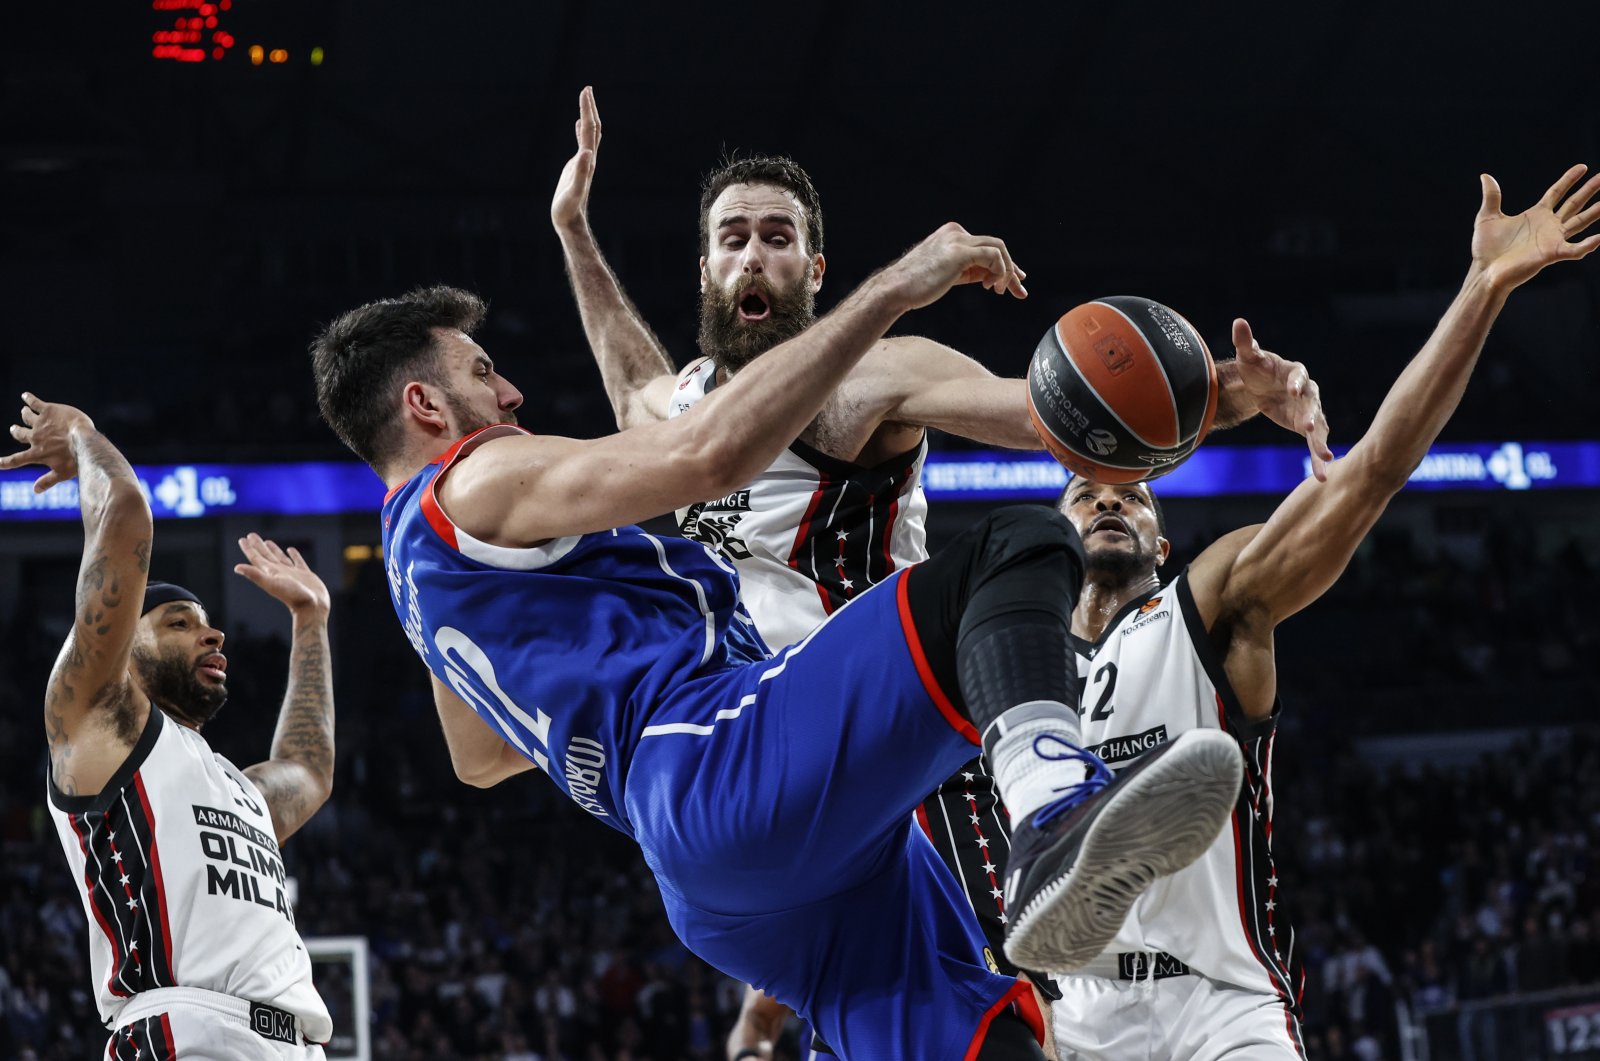 Efes&#039; Vasilije Micic (L) vies with Milan’s Luigi Datome (C) in a EuroLeague game, Istanbul, Turkey, March 24, 2022. (AA Photo)